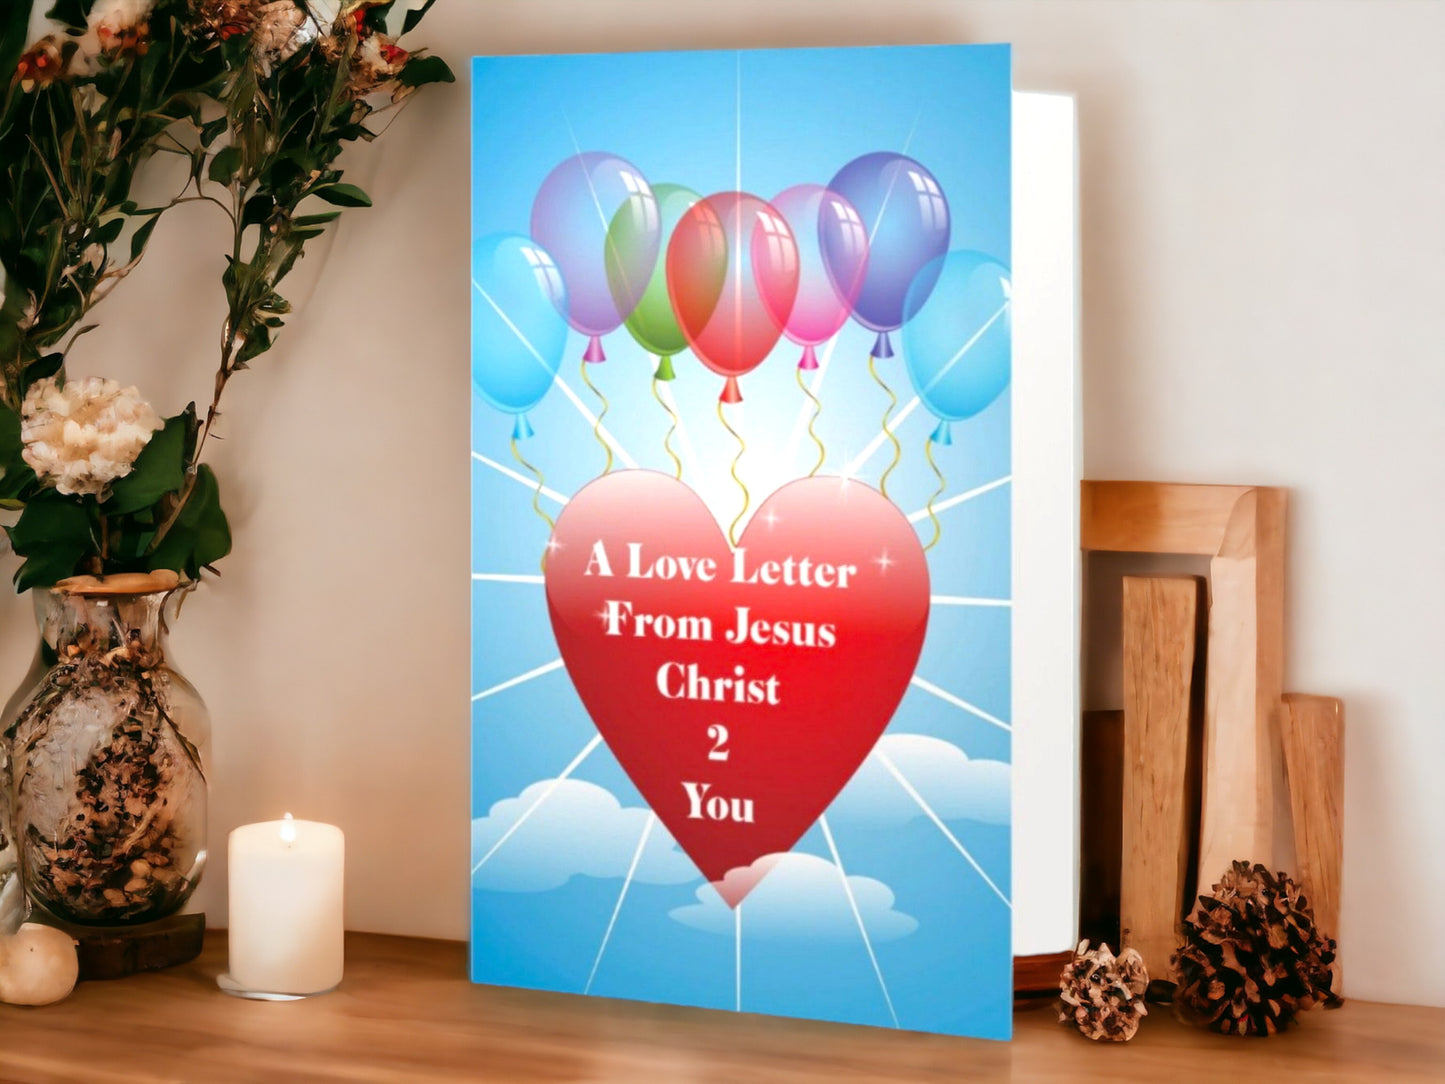 A Love Letter From Jesus Christ 2 You